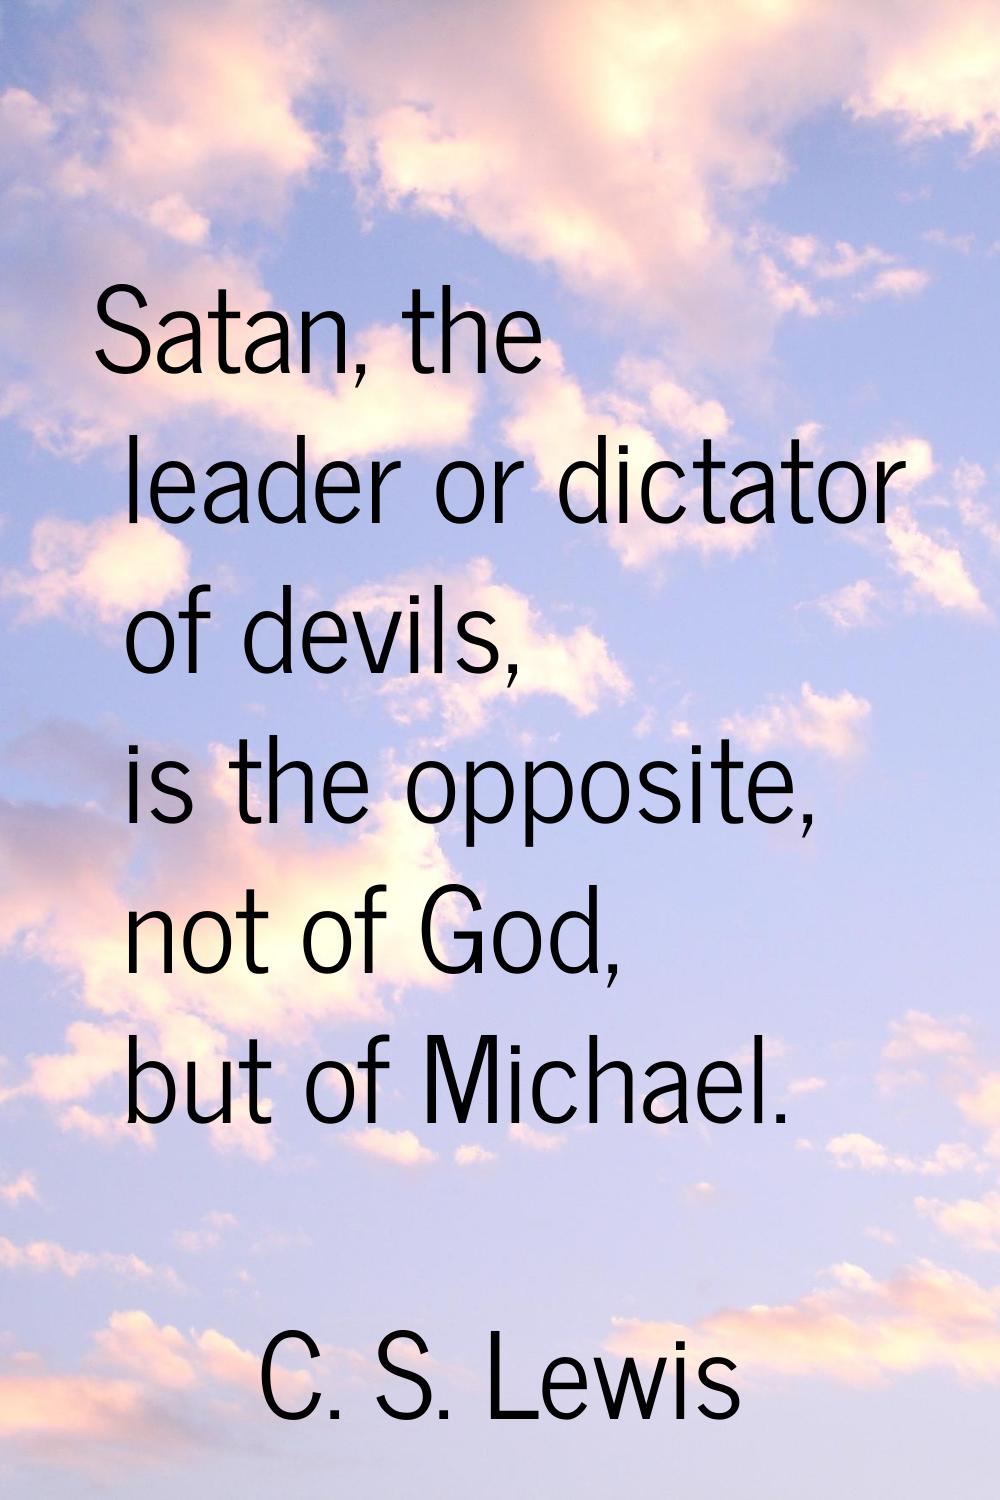 Satan, the leader or dictator of devils, is the opposite, not of God, but of Michael.